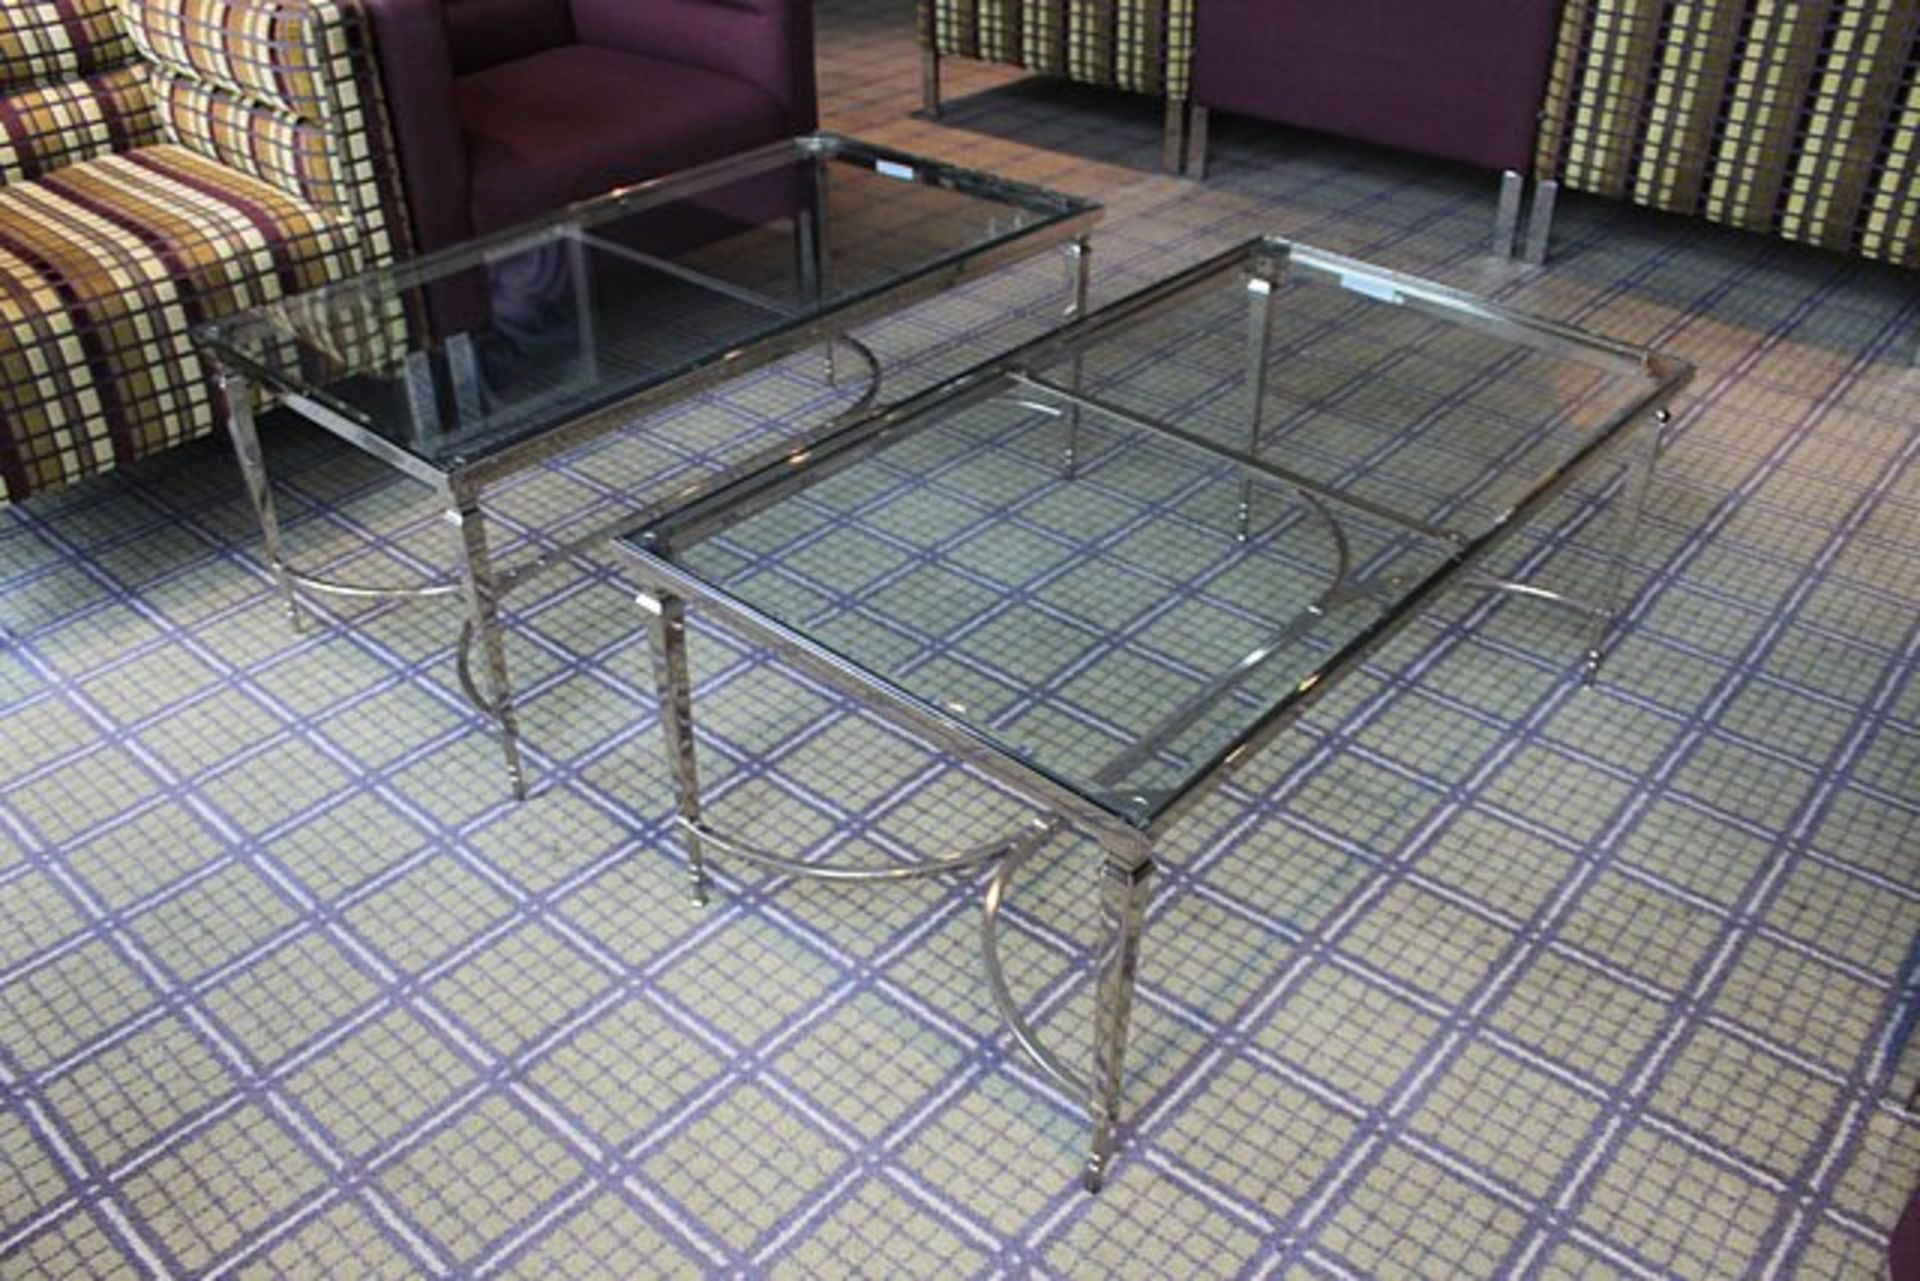 Chelsom Furniture Rectangular Tempered Glass Coffee Table Polished Steel Base FSW/F10133 1020 X